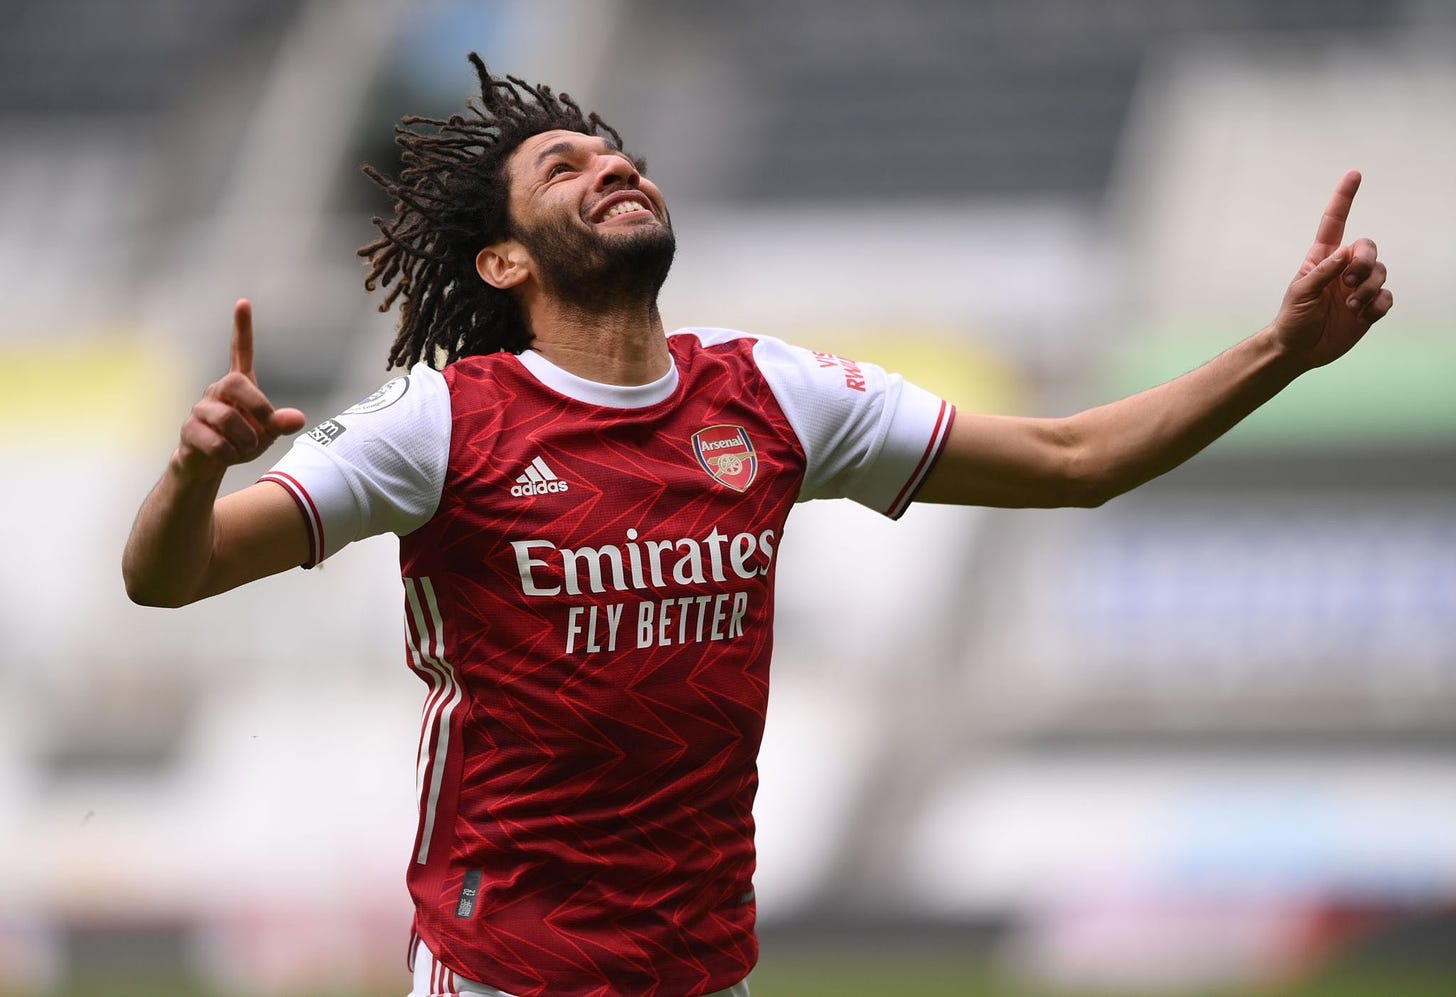 A specific event cost Elneny new Arsenal contract, Agent reveals